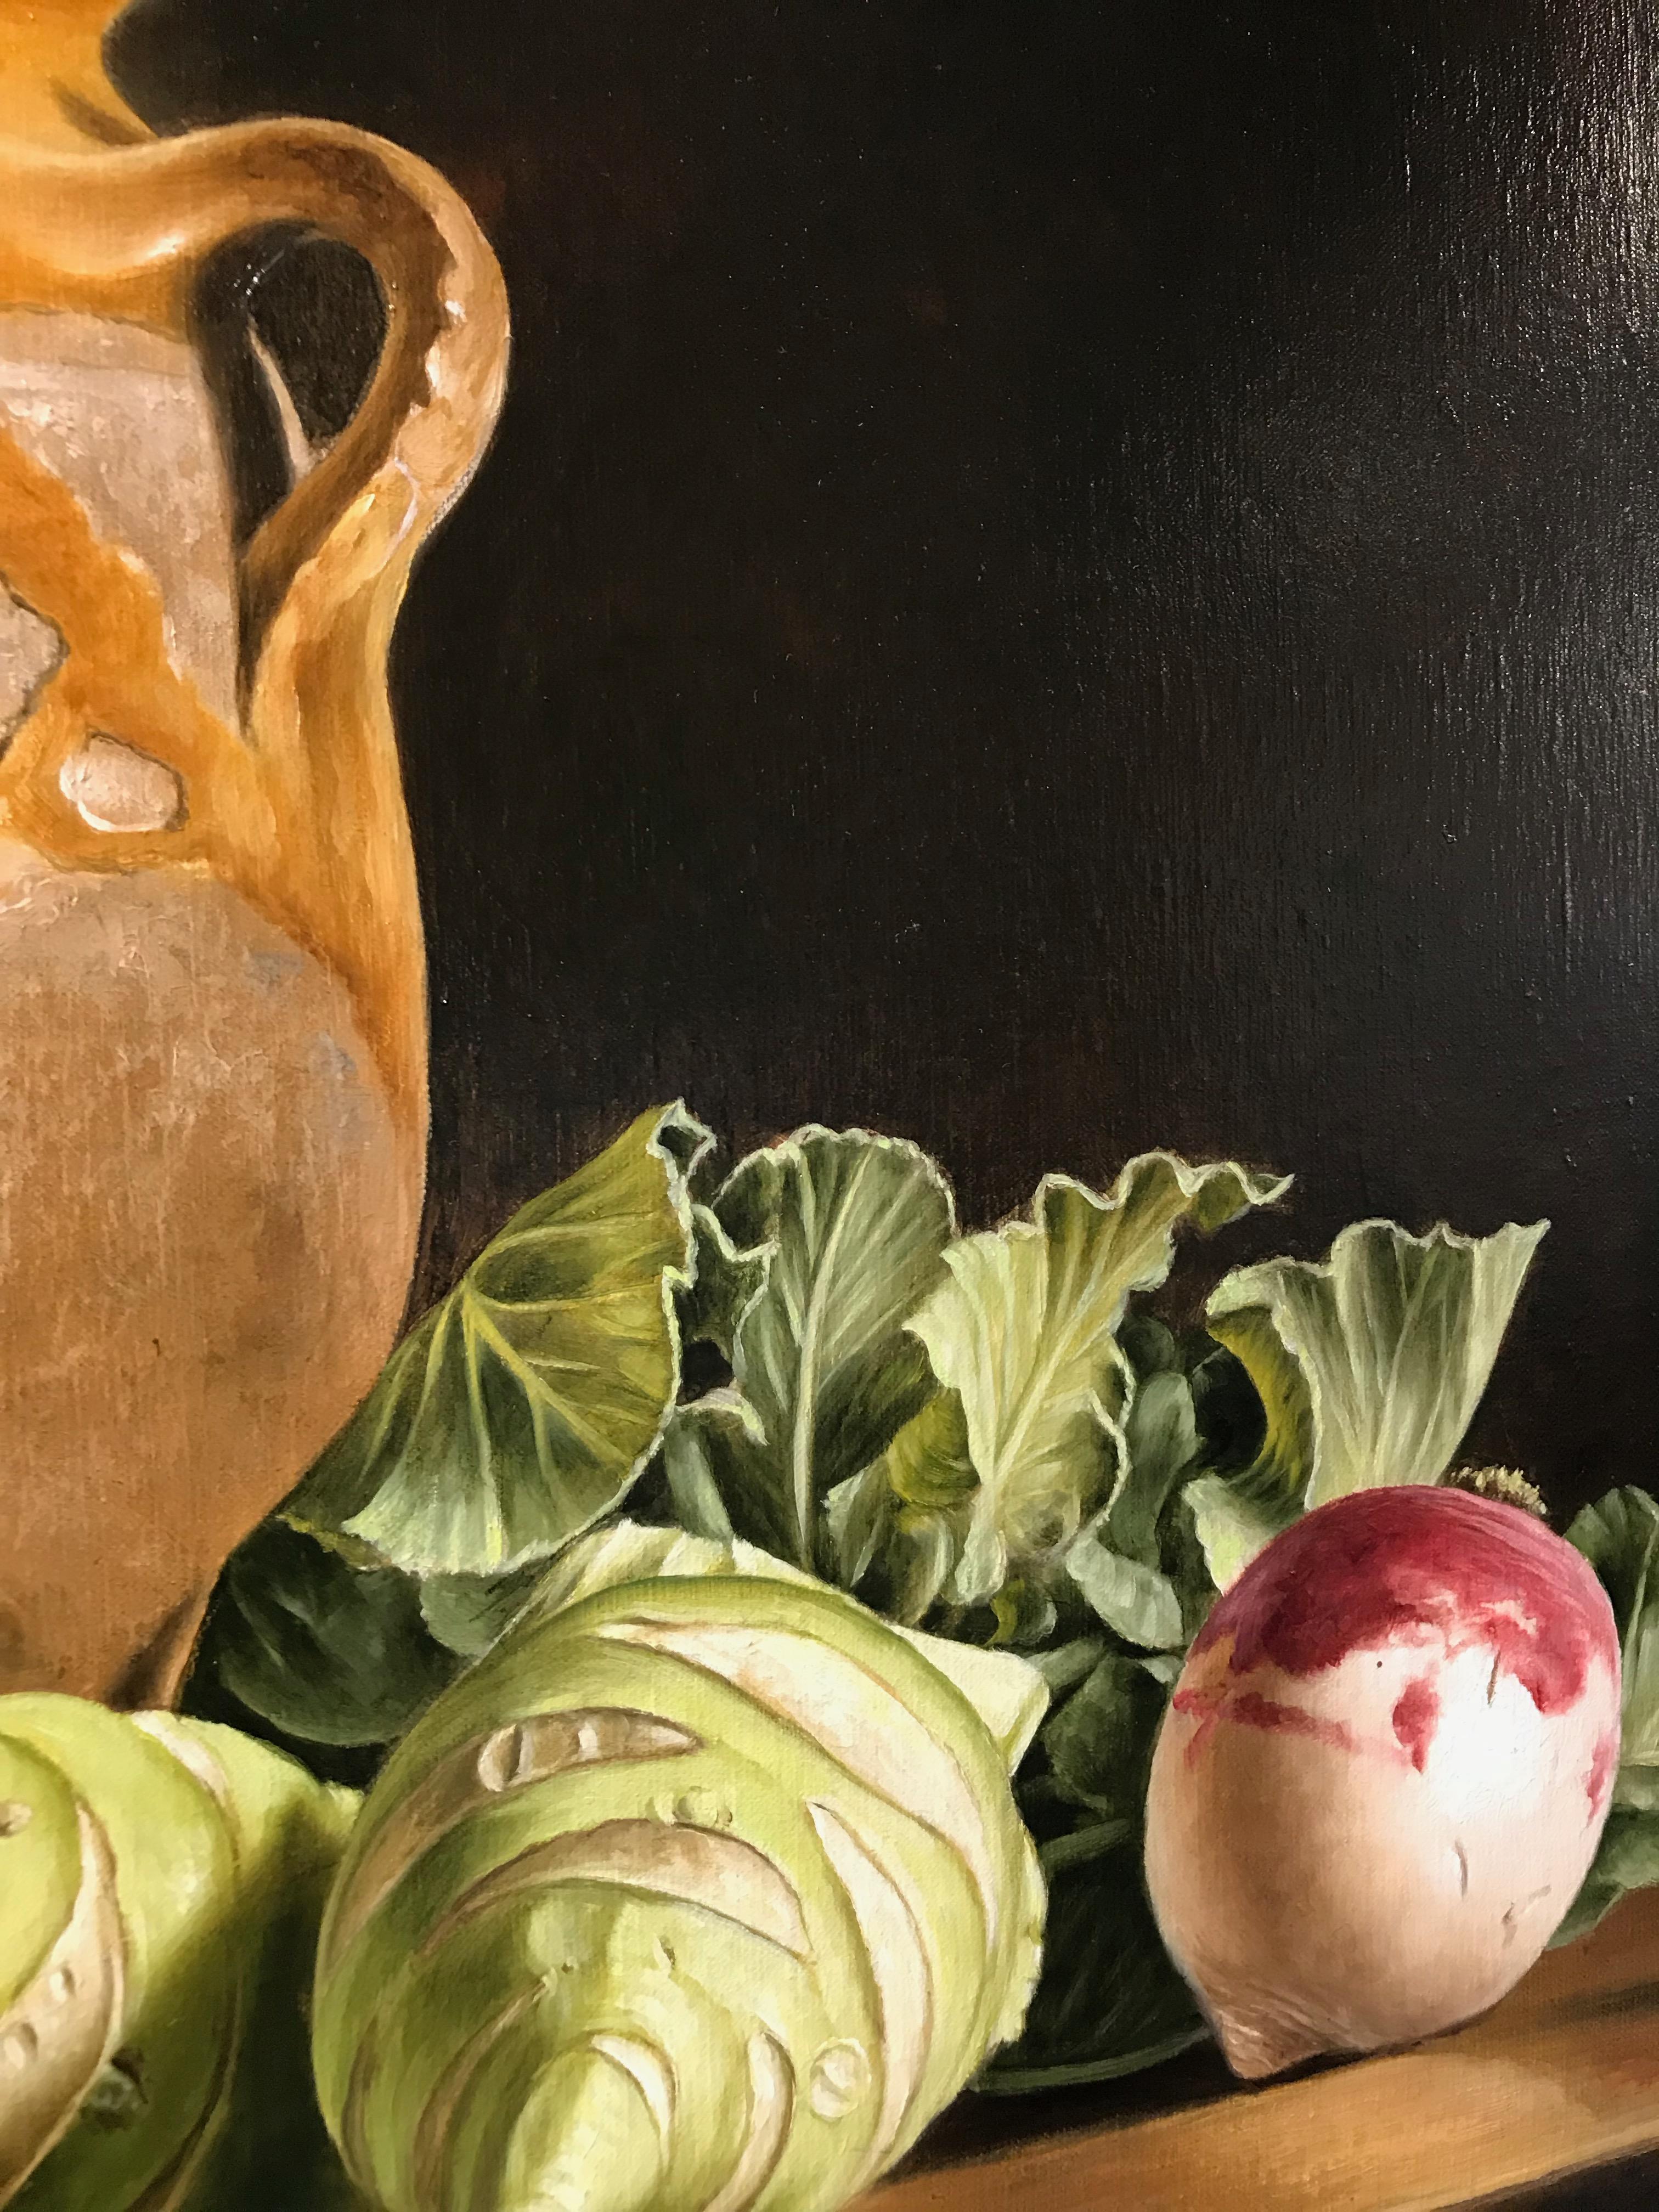 Contemporary 'Still Life with Kohlrabi and Turnips' by Stefaan Eyckmans